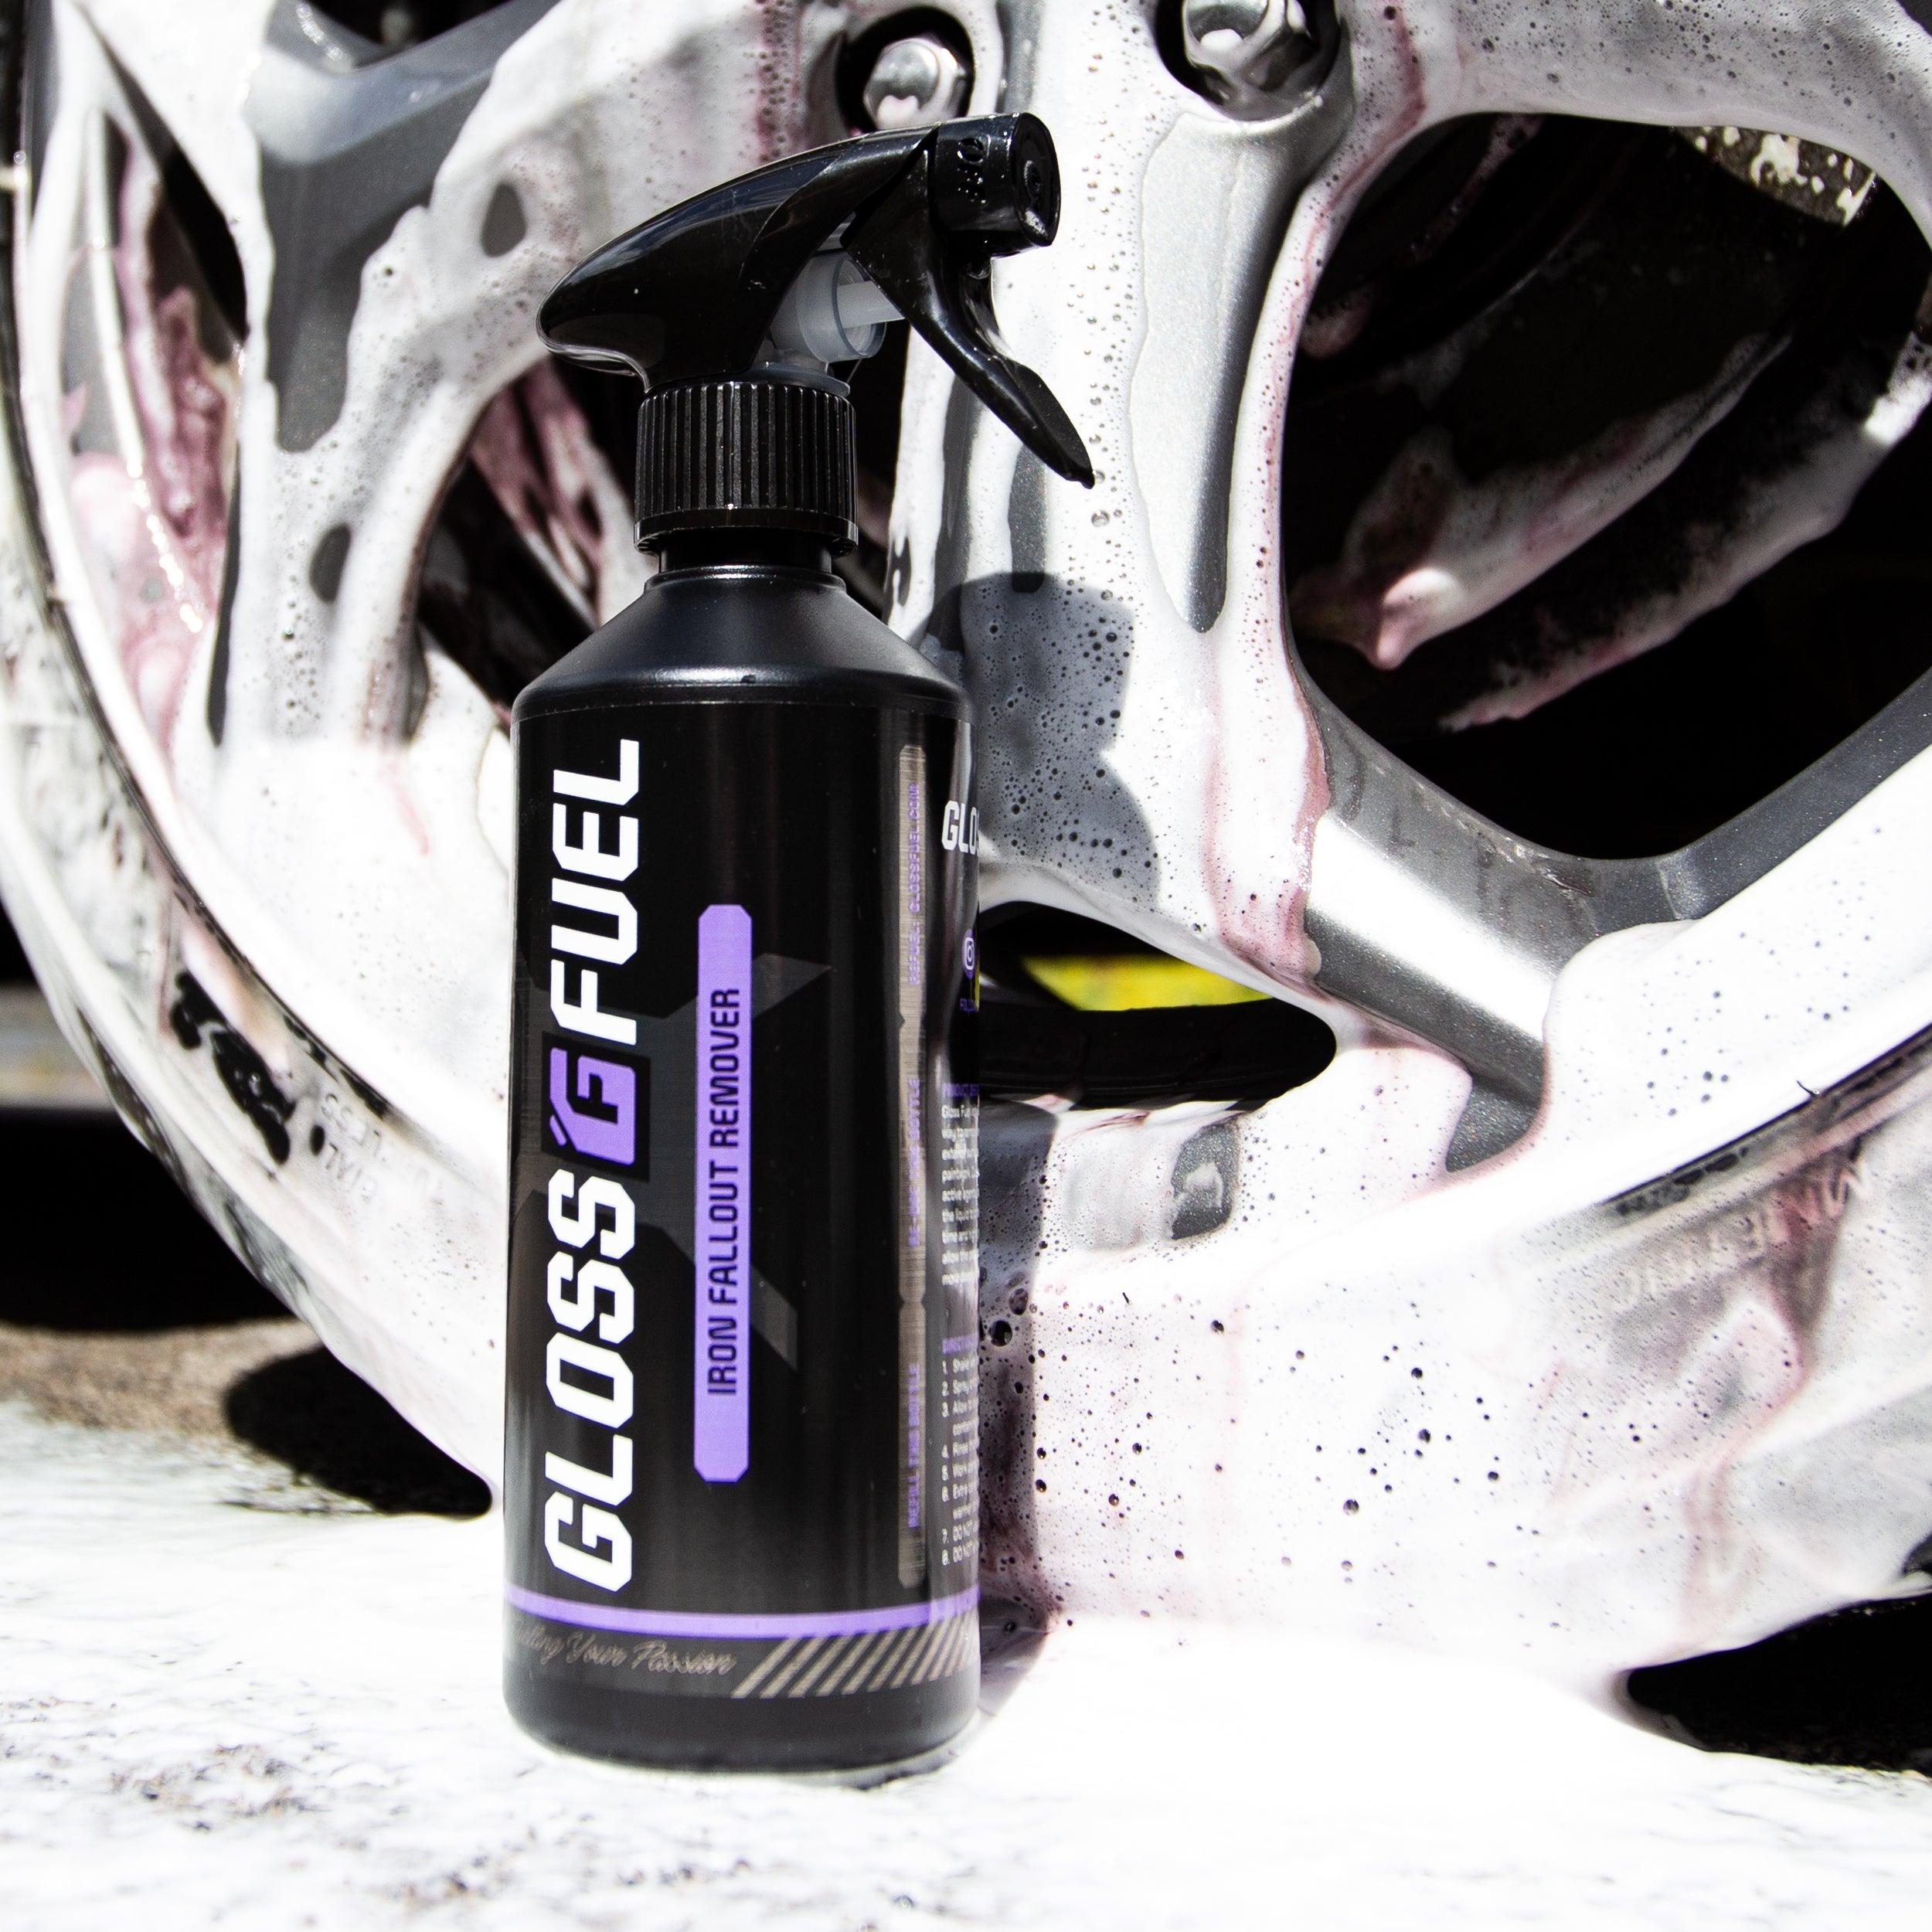 Gloss Fuel Iron Fallout Remover Trigger Spray Bottle Cleaning a Dirty Ford Focus ST Alloy Wheel